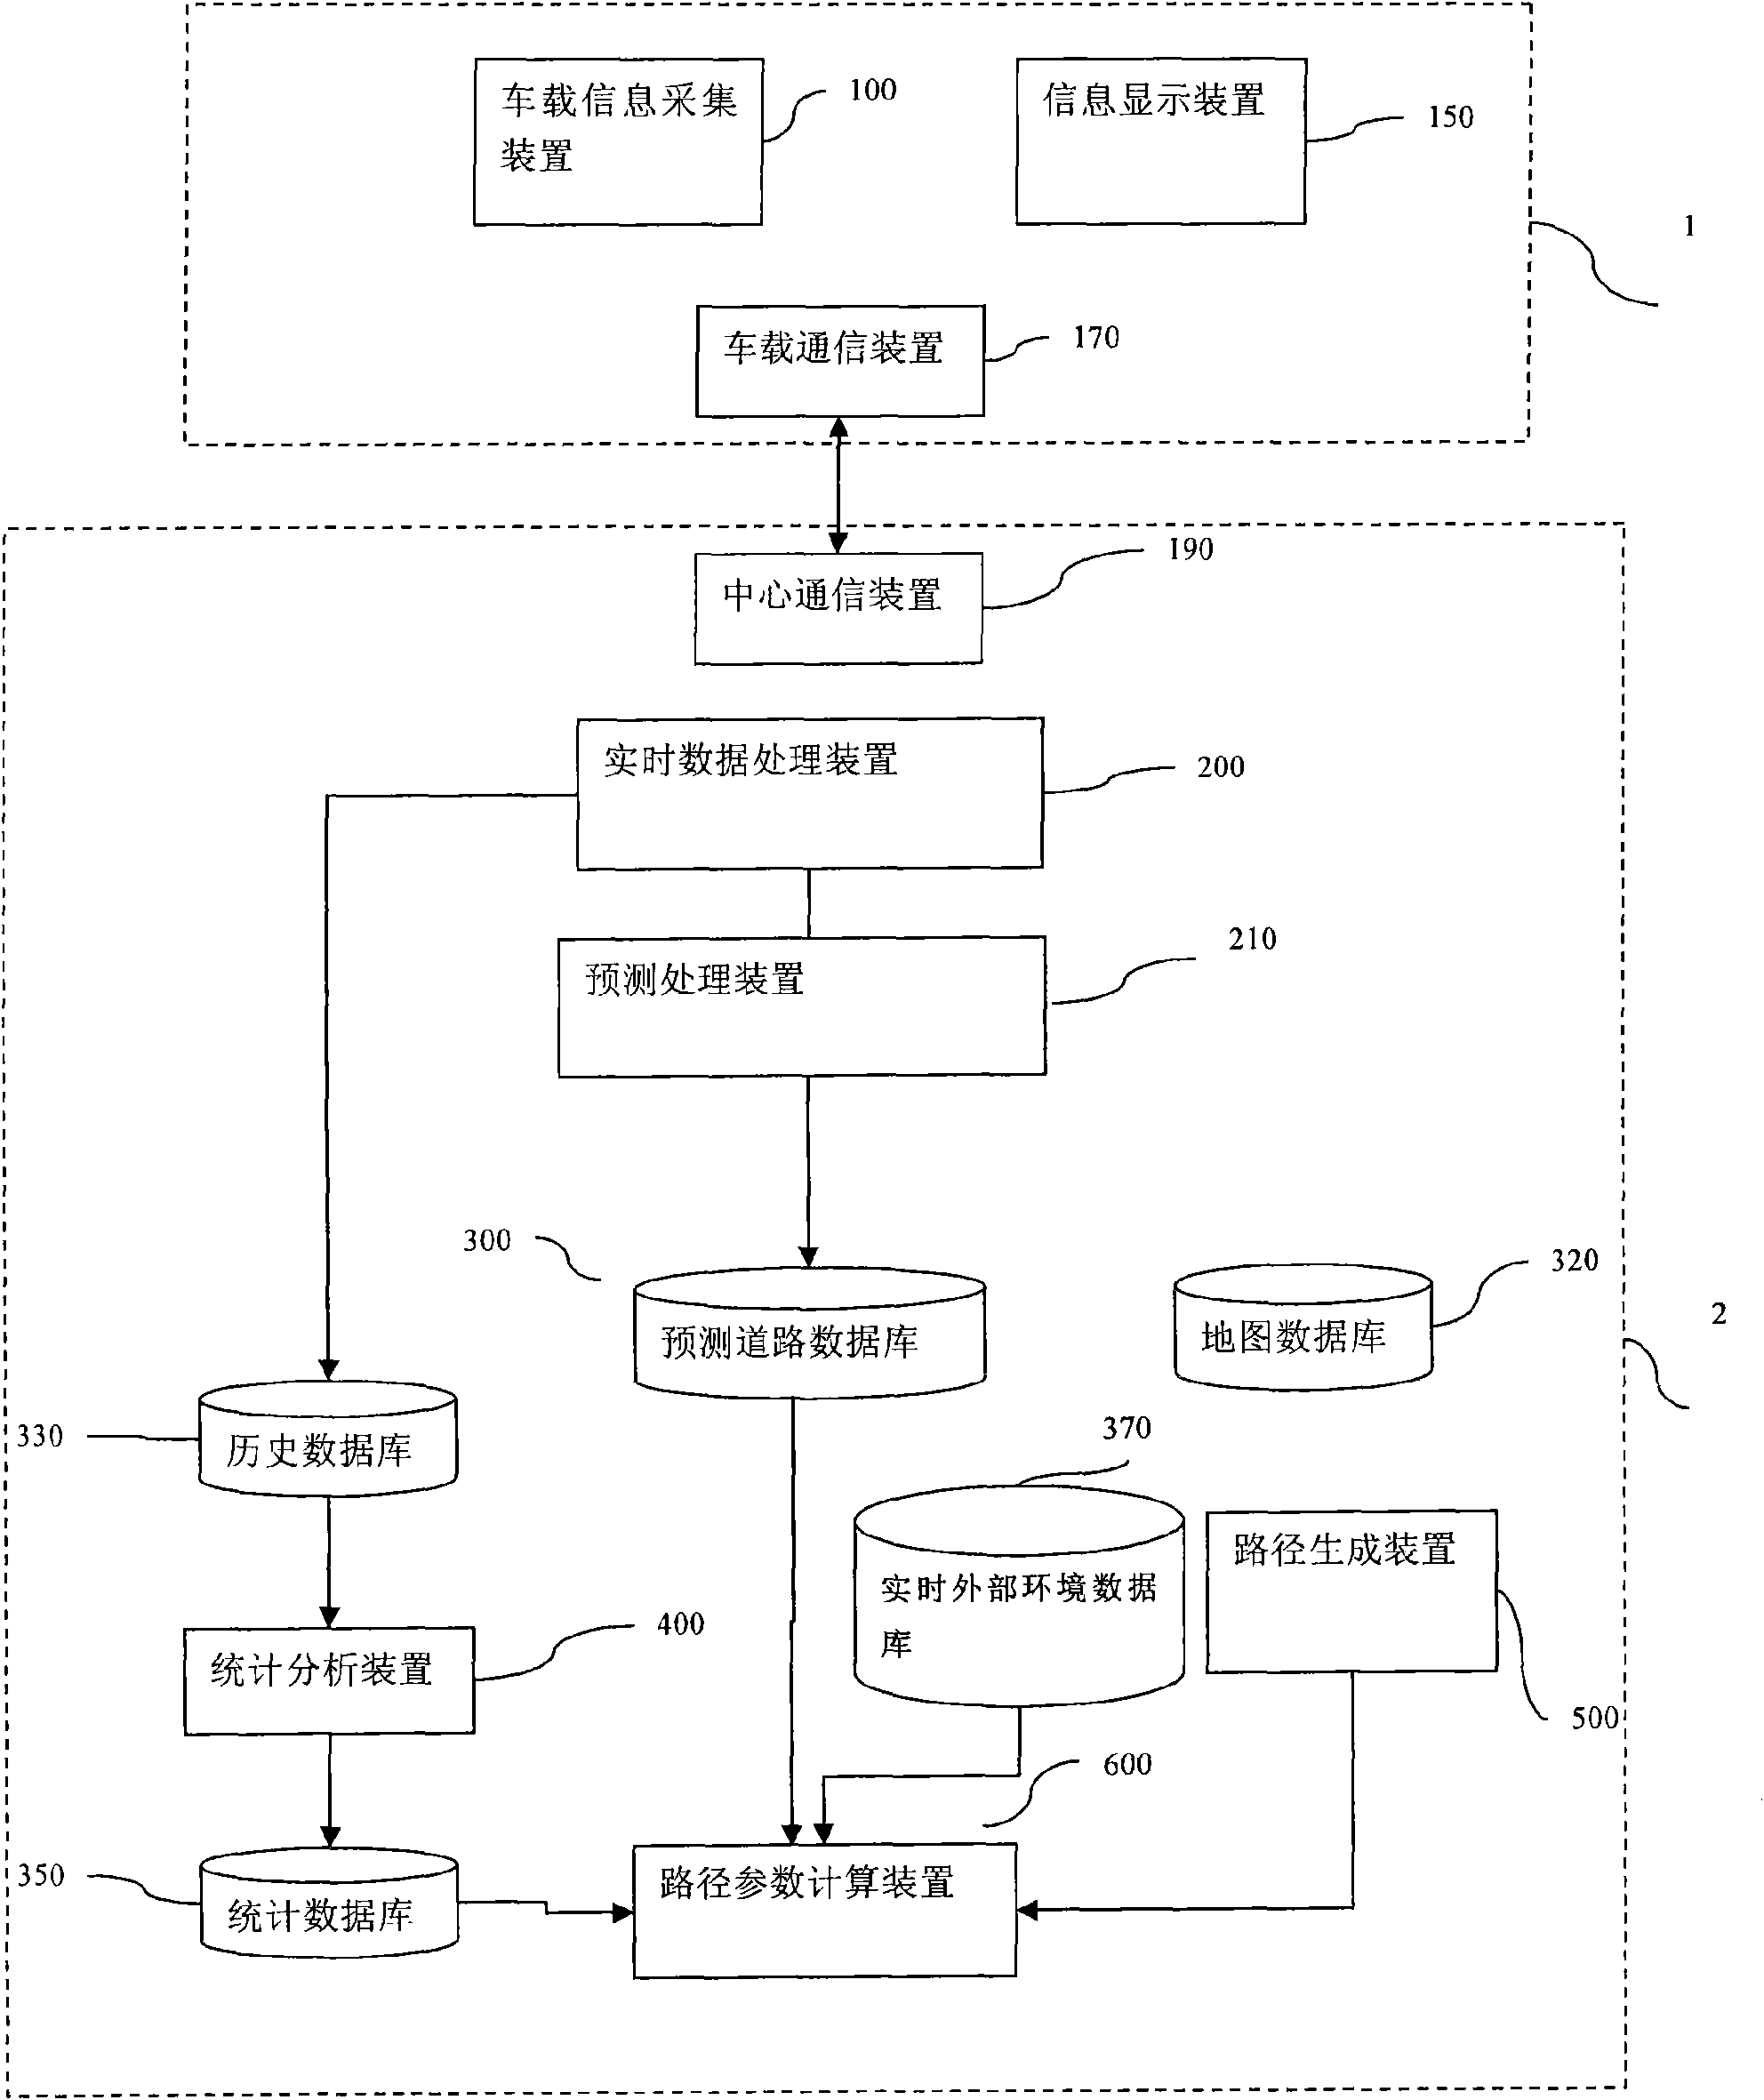 System and method for forecasting passenger information and searching the same